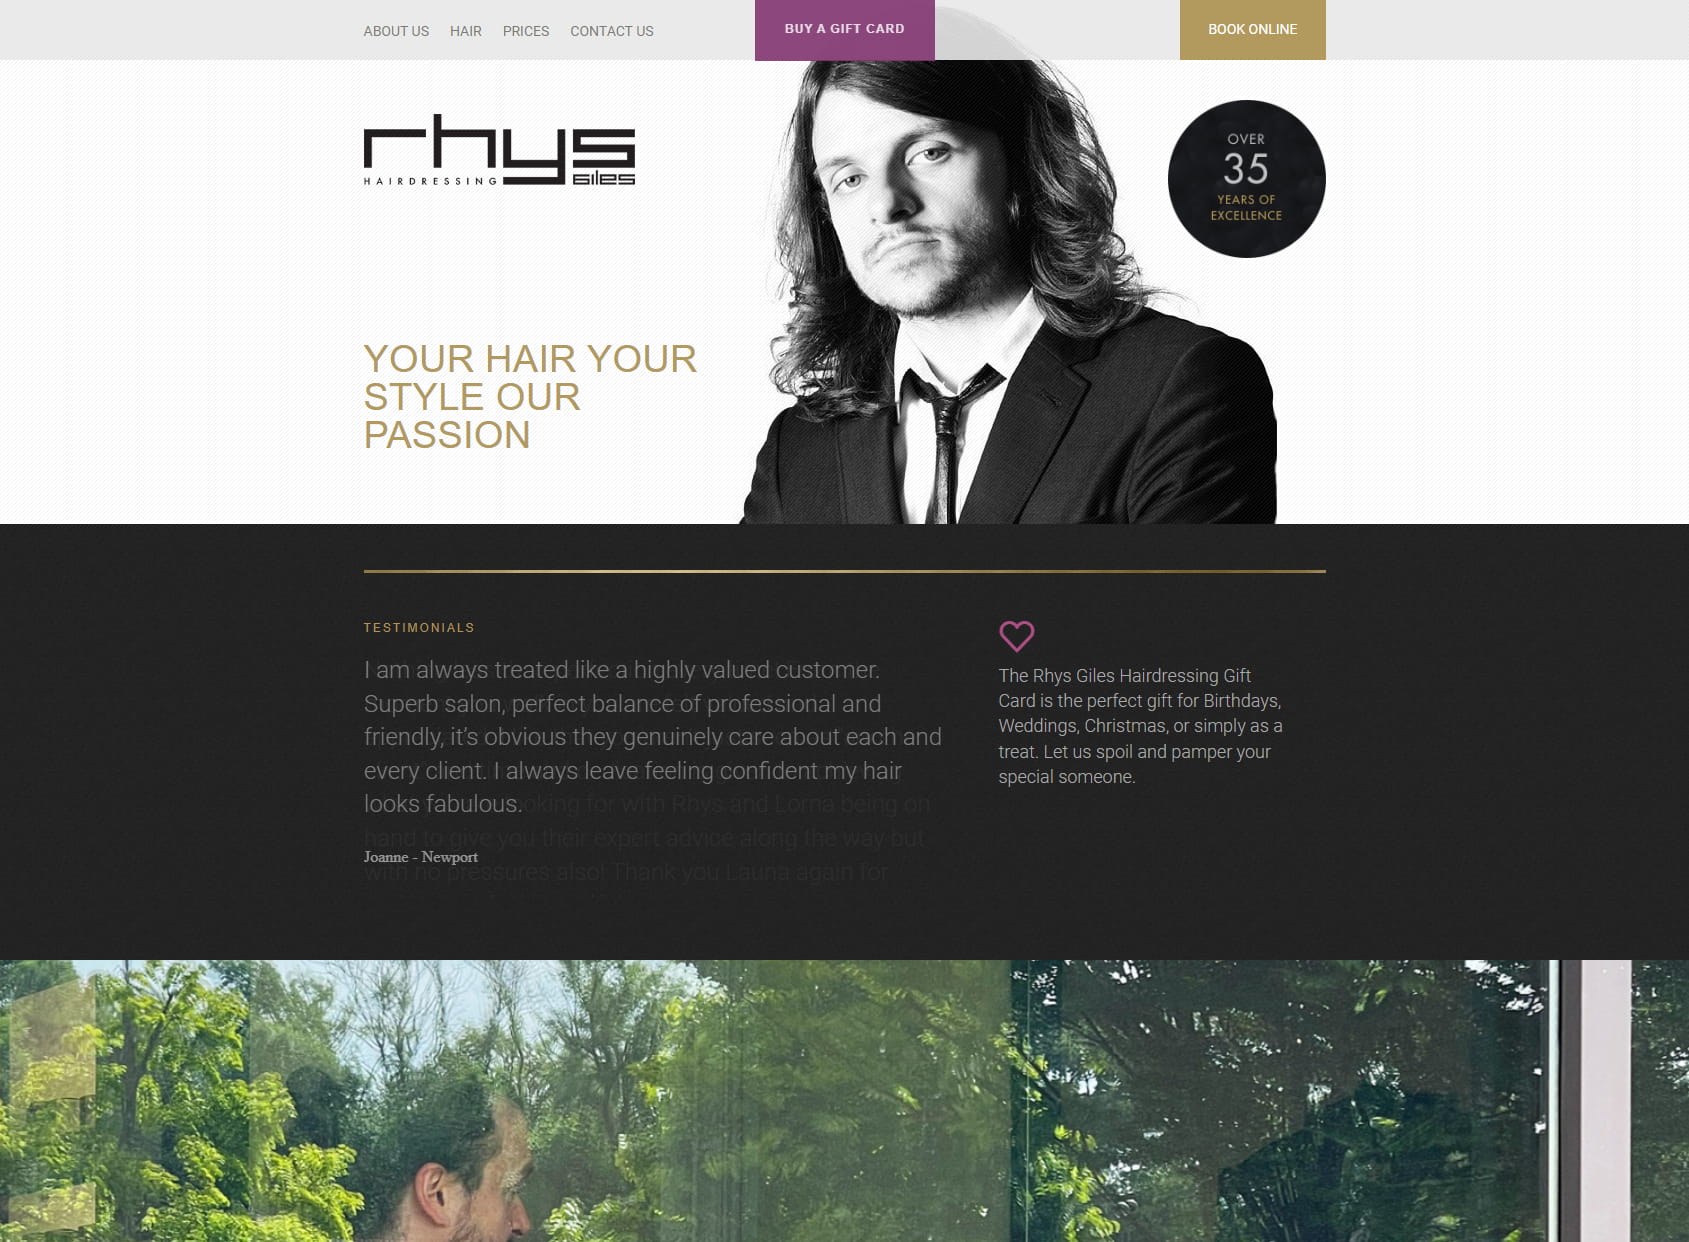 Rhys Giles Hairdressing at The Celtic Manor Resort